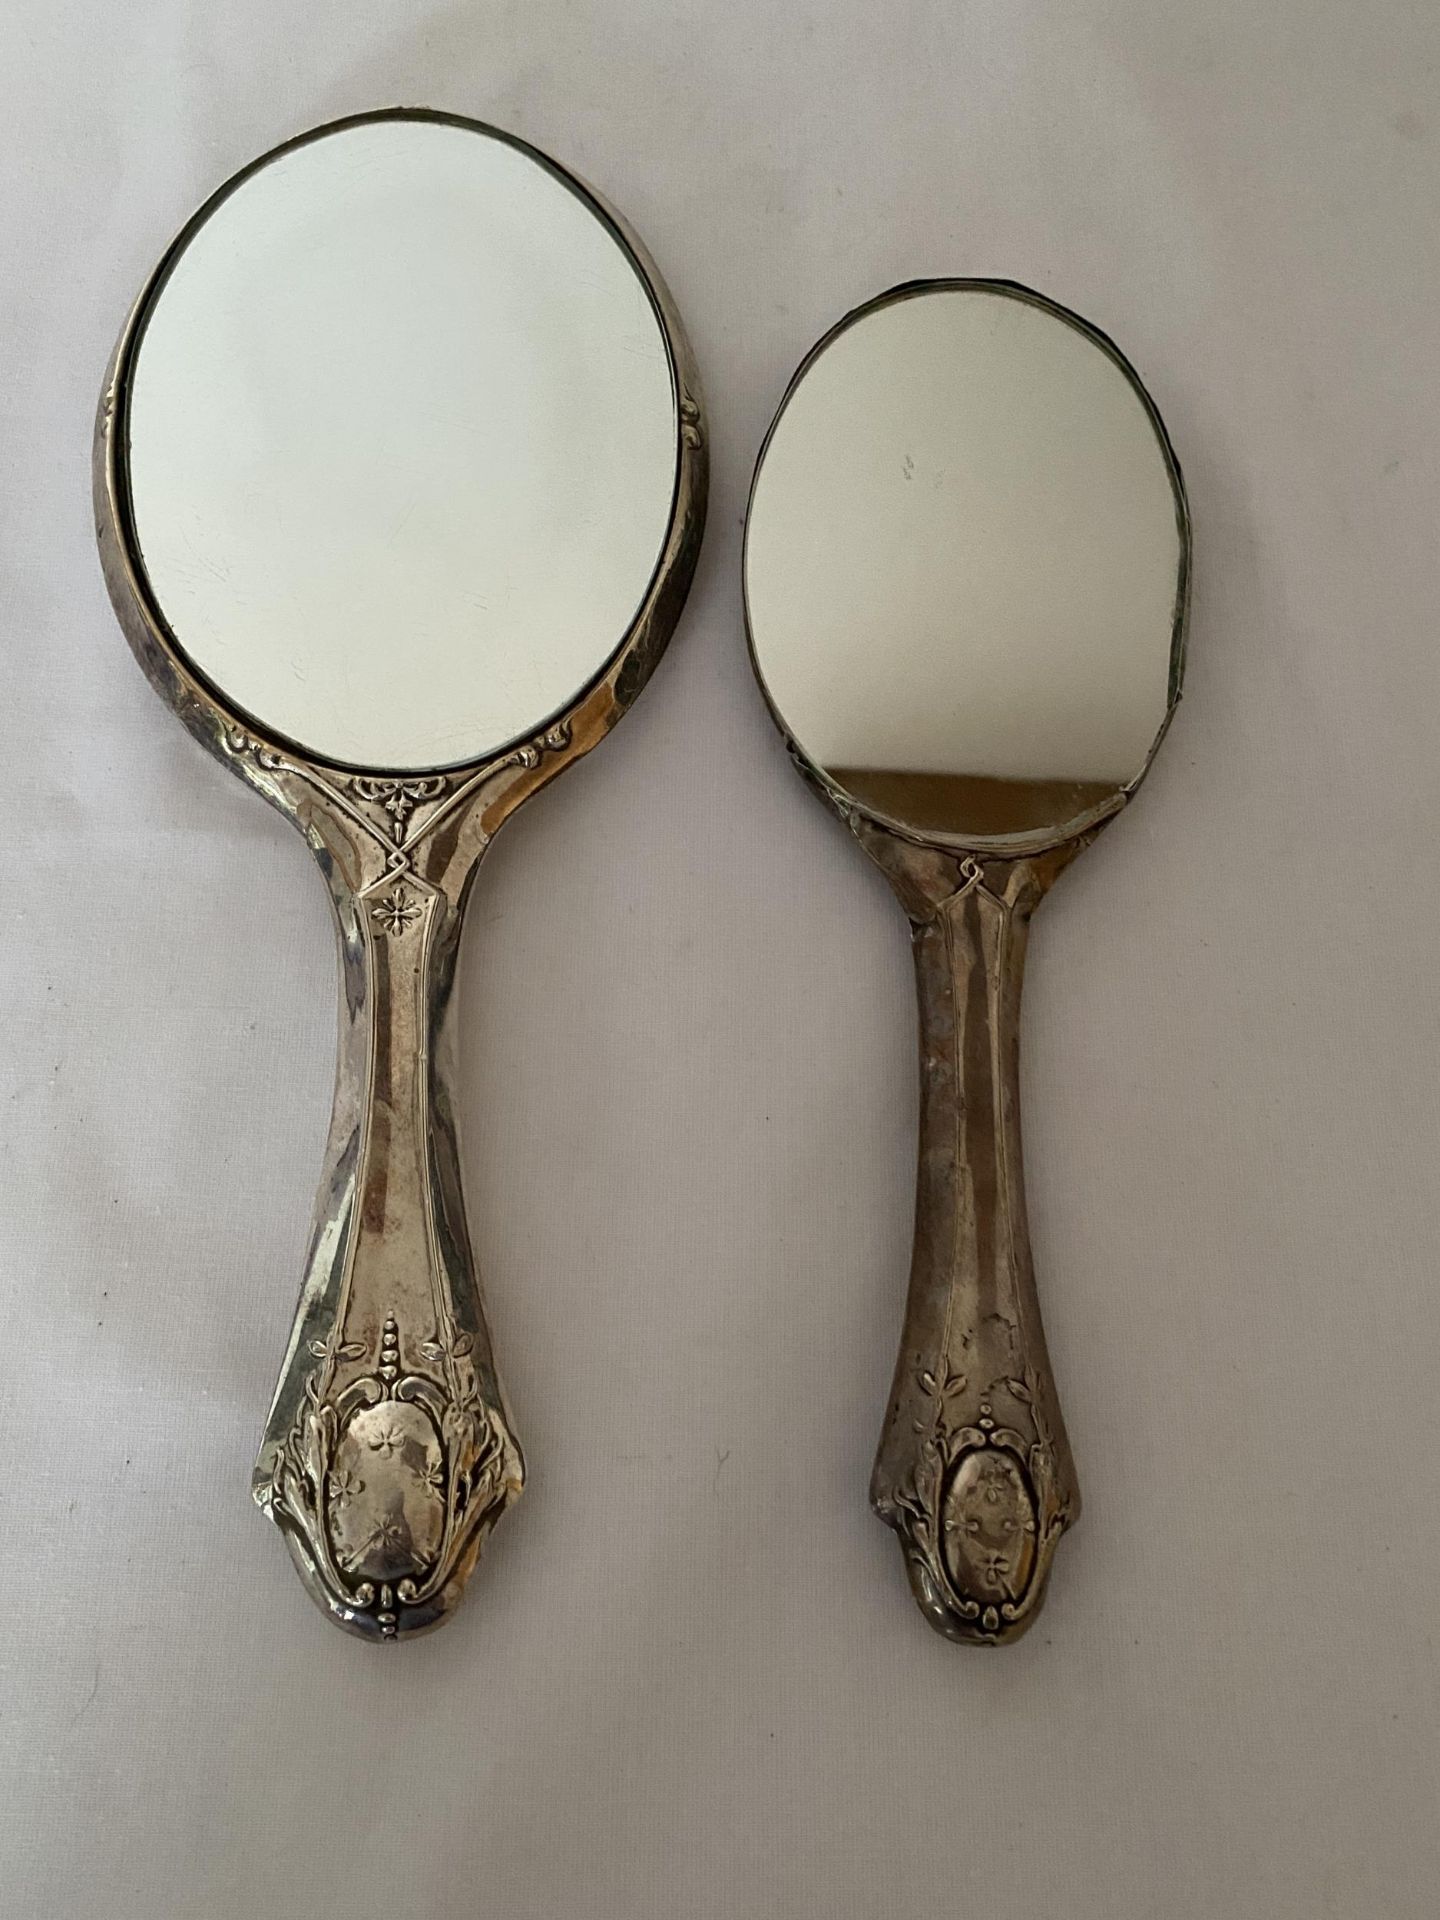 TWO HALLMARKED BIRMINGHAM SILVER BACKED HAND MIRRORS, EARLIEST DATING TO 1913 - Image 12 of 18